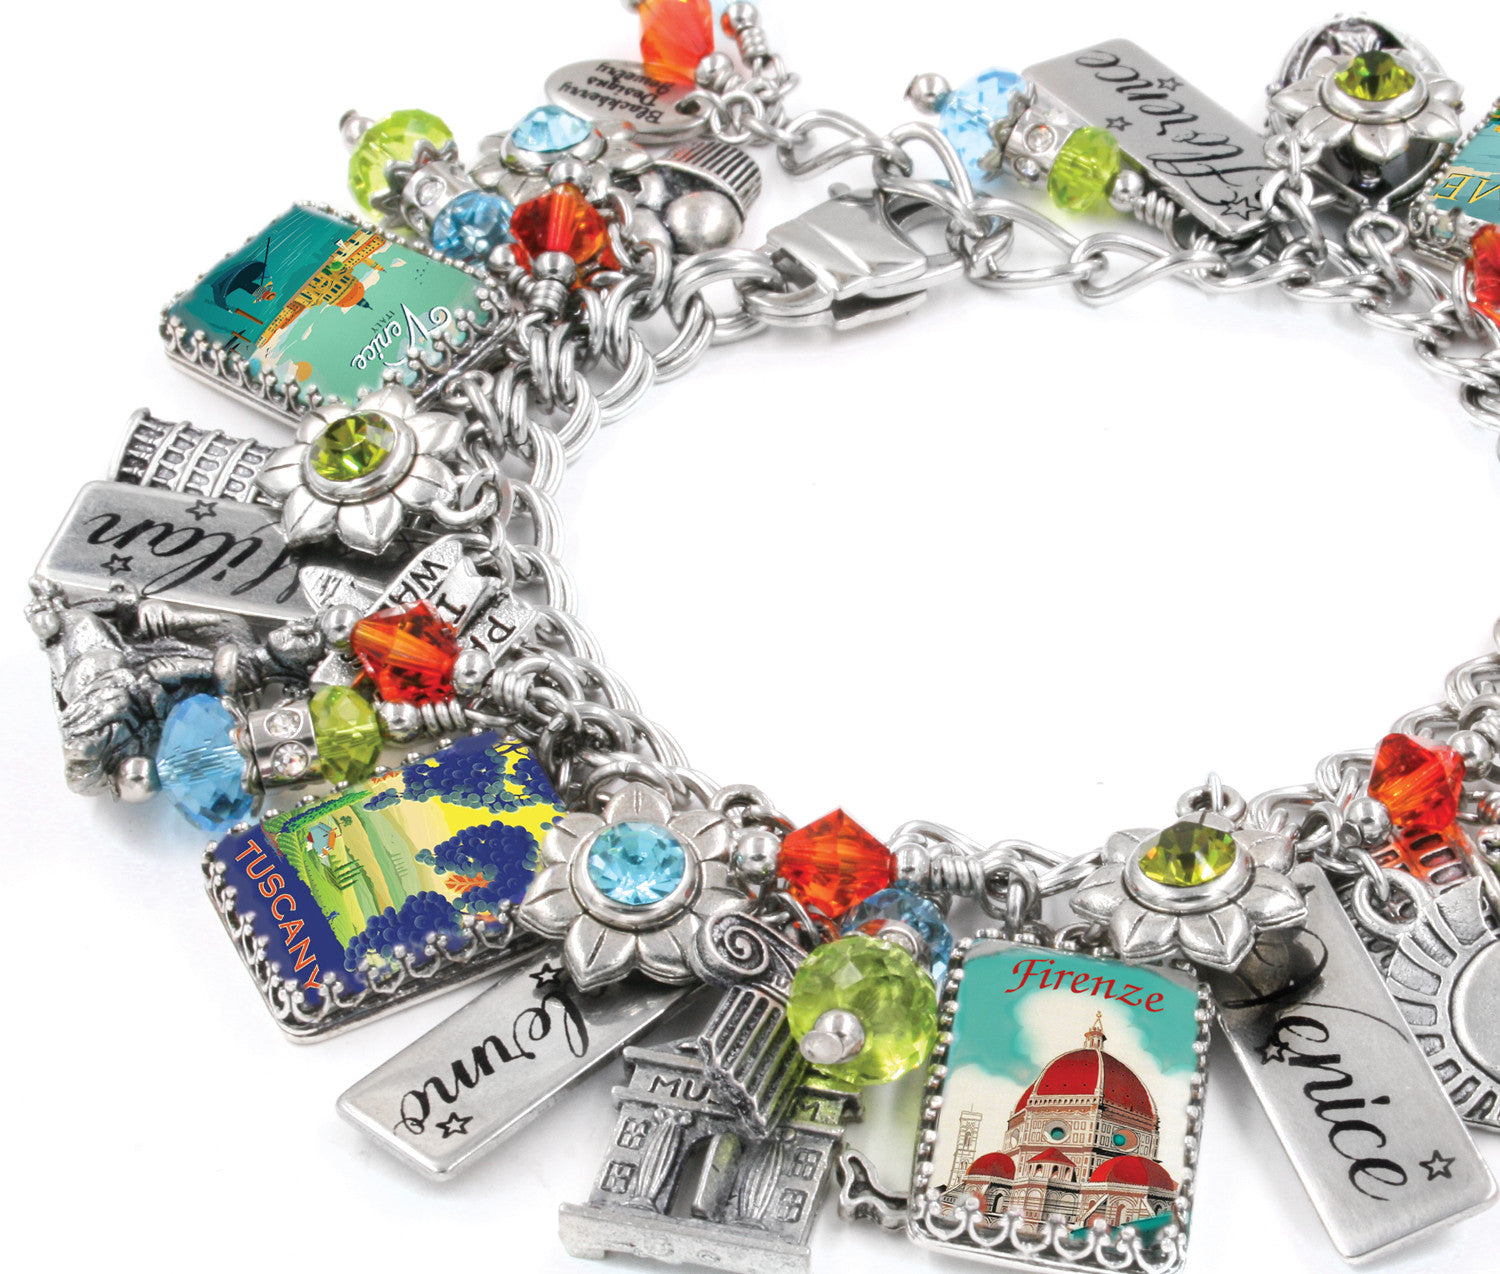 Beautiful Italy charm bracelet with vintage italian travel posters and